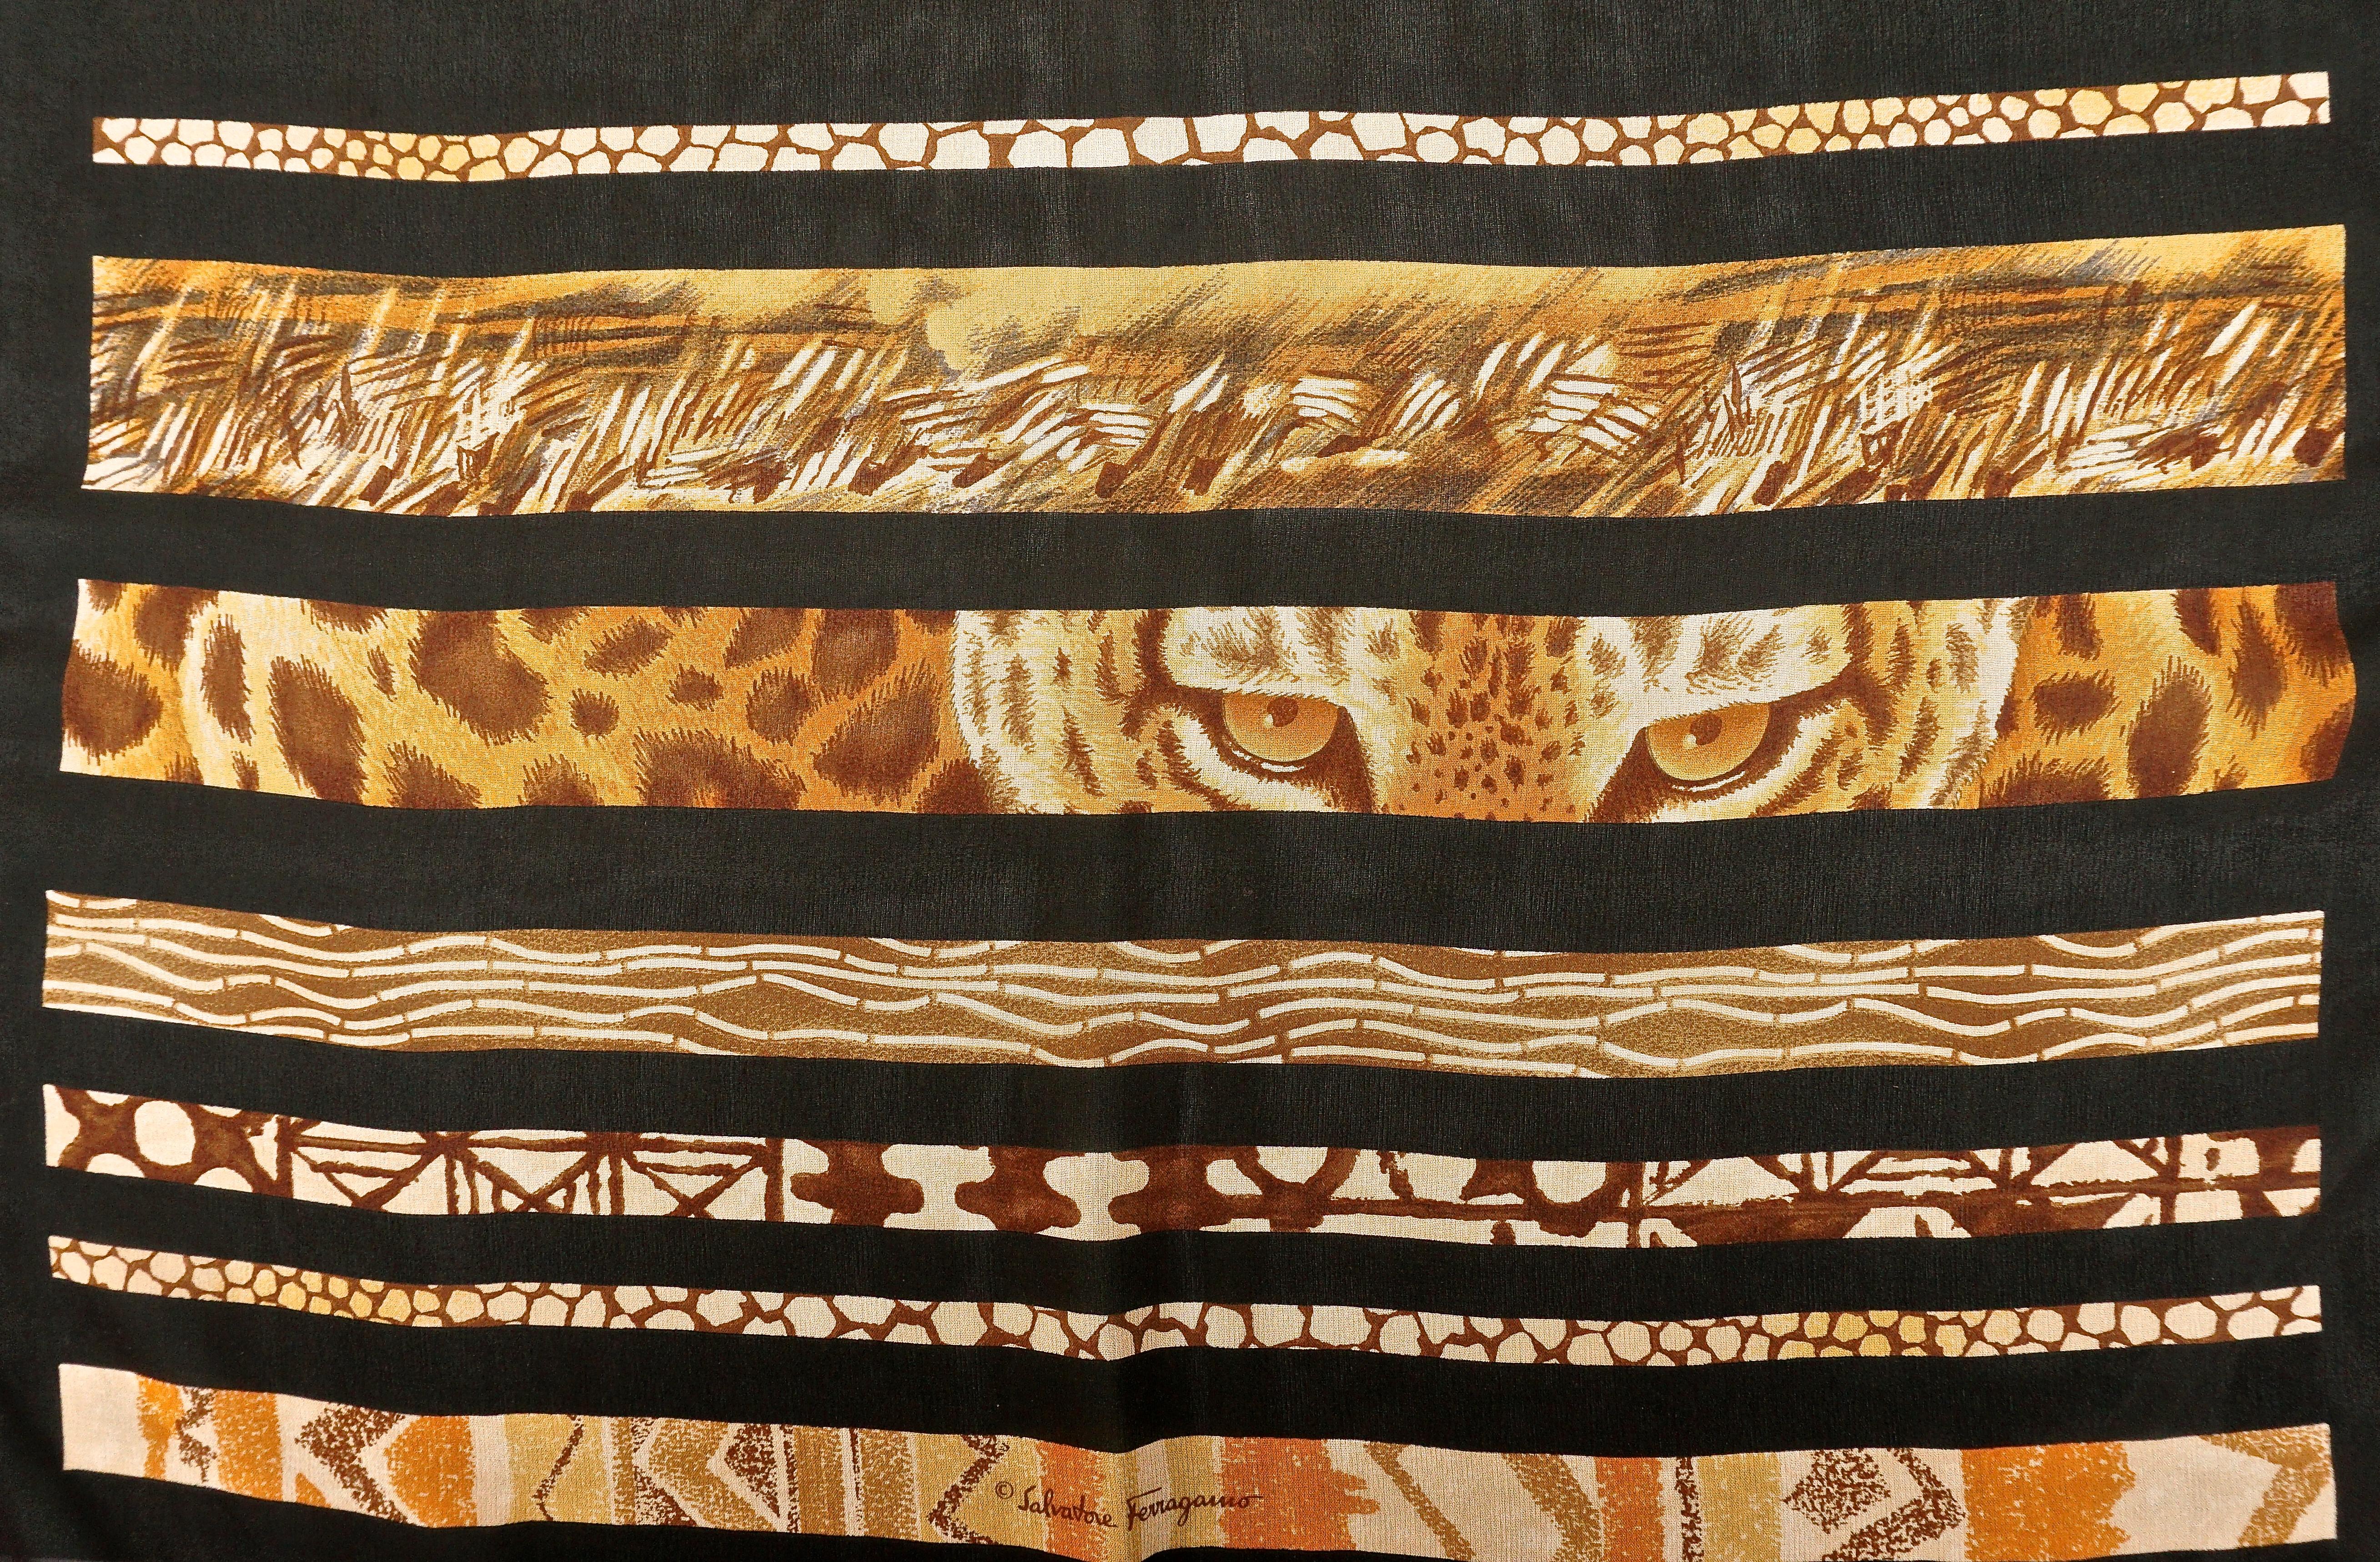 Long Salvatore Ferragamo pure silk chiffon scarf featuring a beautiful striped African print. The scarf is in browns and golds on a black background, and has hand rolled edges. Measuring length 150cm / 59 inches by width 43.18cm / 17 inches. The